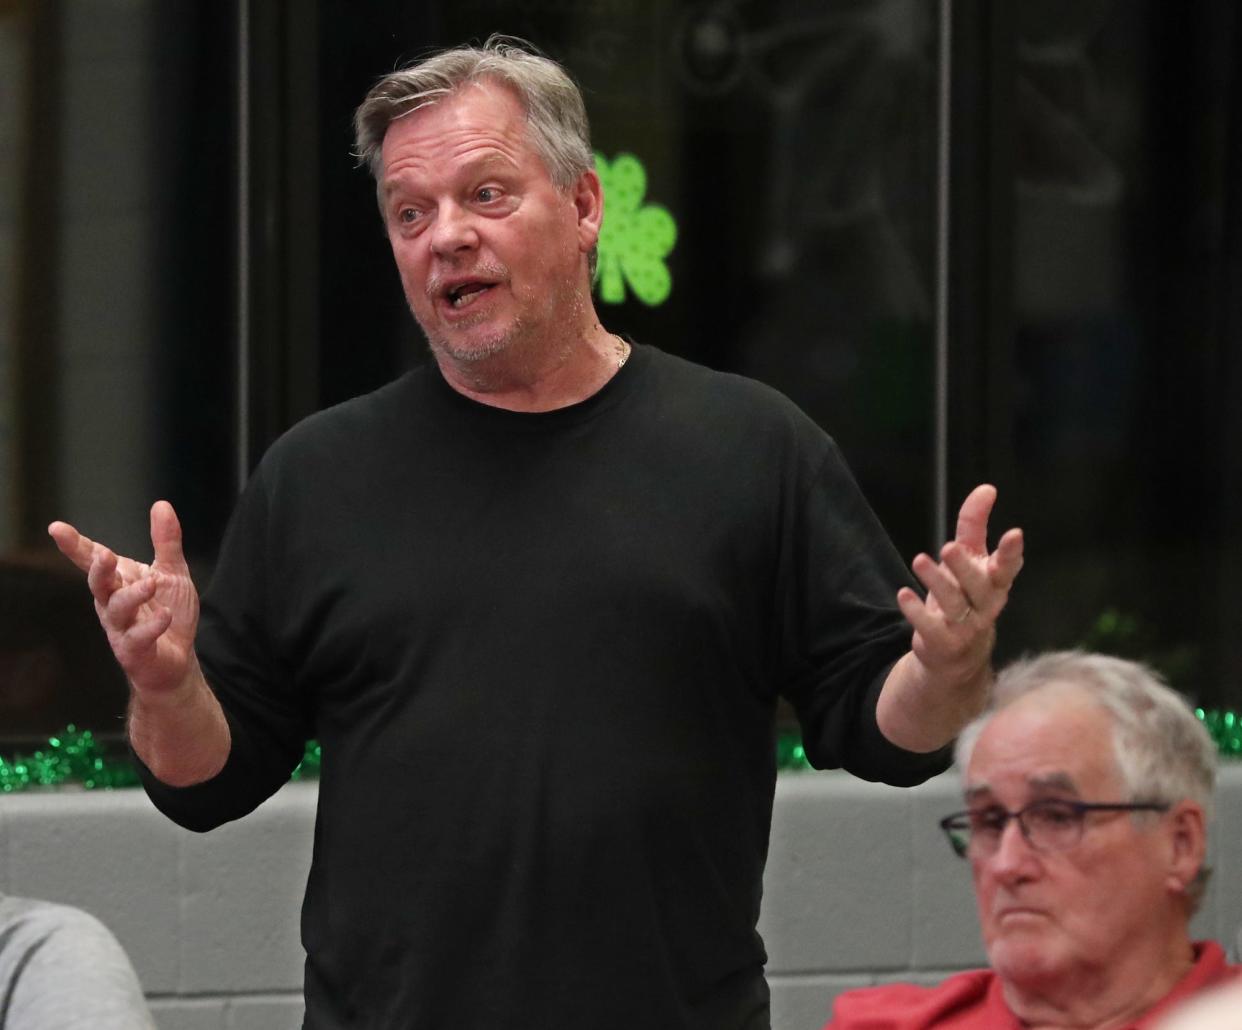 Rick Laney asks a question Tuesday during the Ward 9 monthly meeting at the Kenmore Community Center.